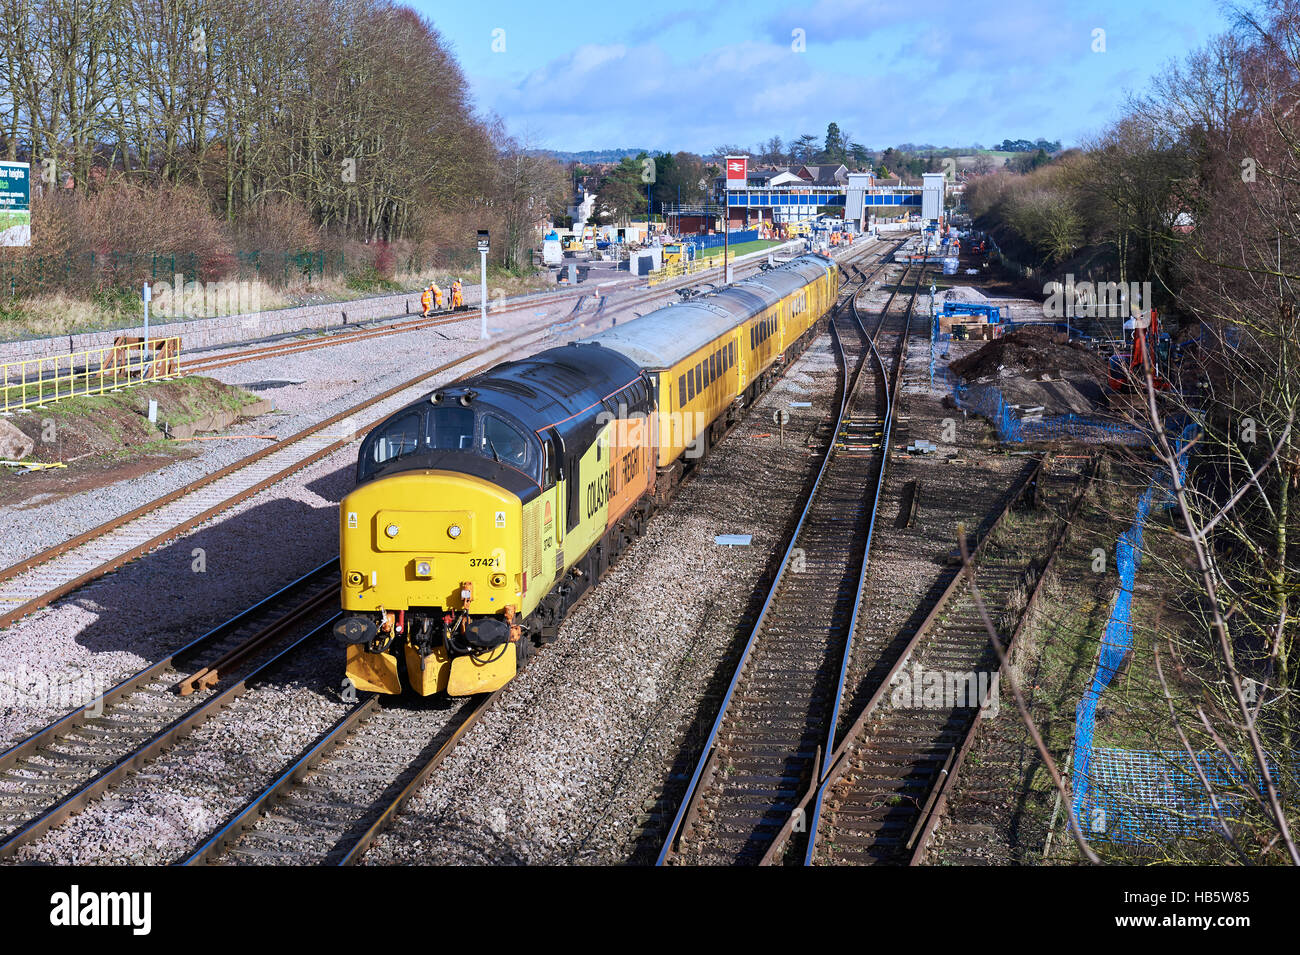 37421 heads 1Q04 06:49 Derby RTC to Exeter Riverside Yard test train with 97301 on the rear through Bromsgrove on 09/02/16. Stock Photo